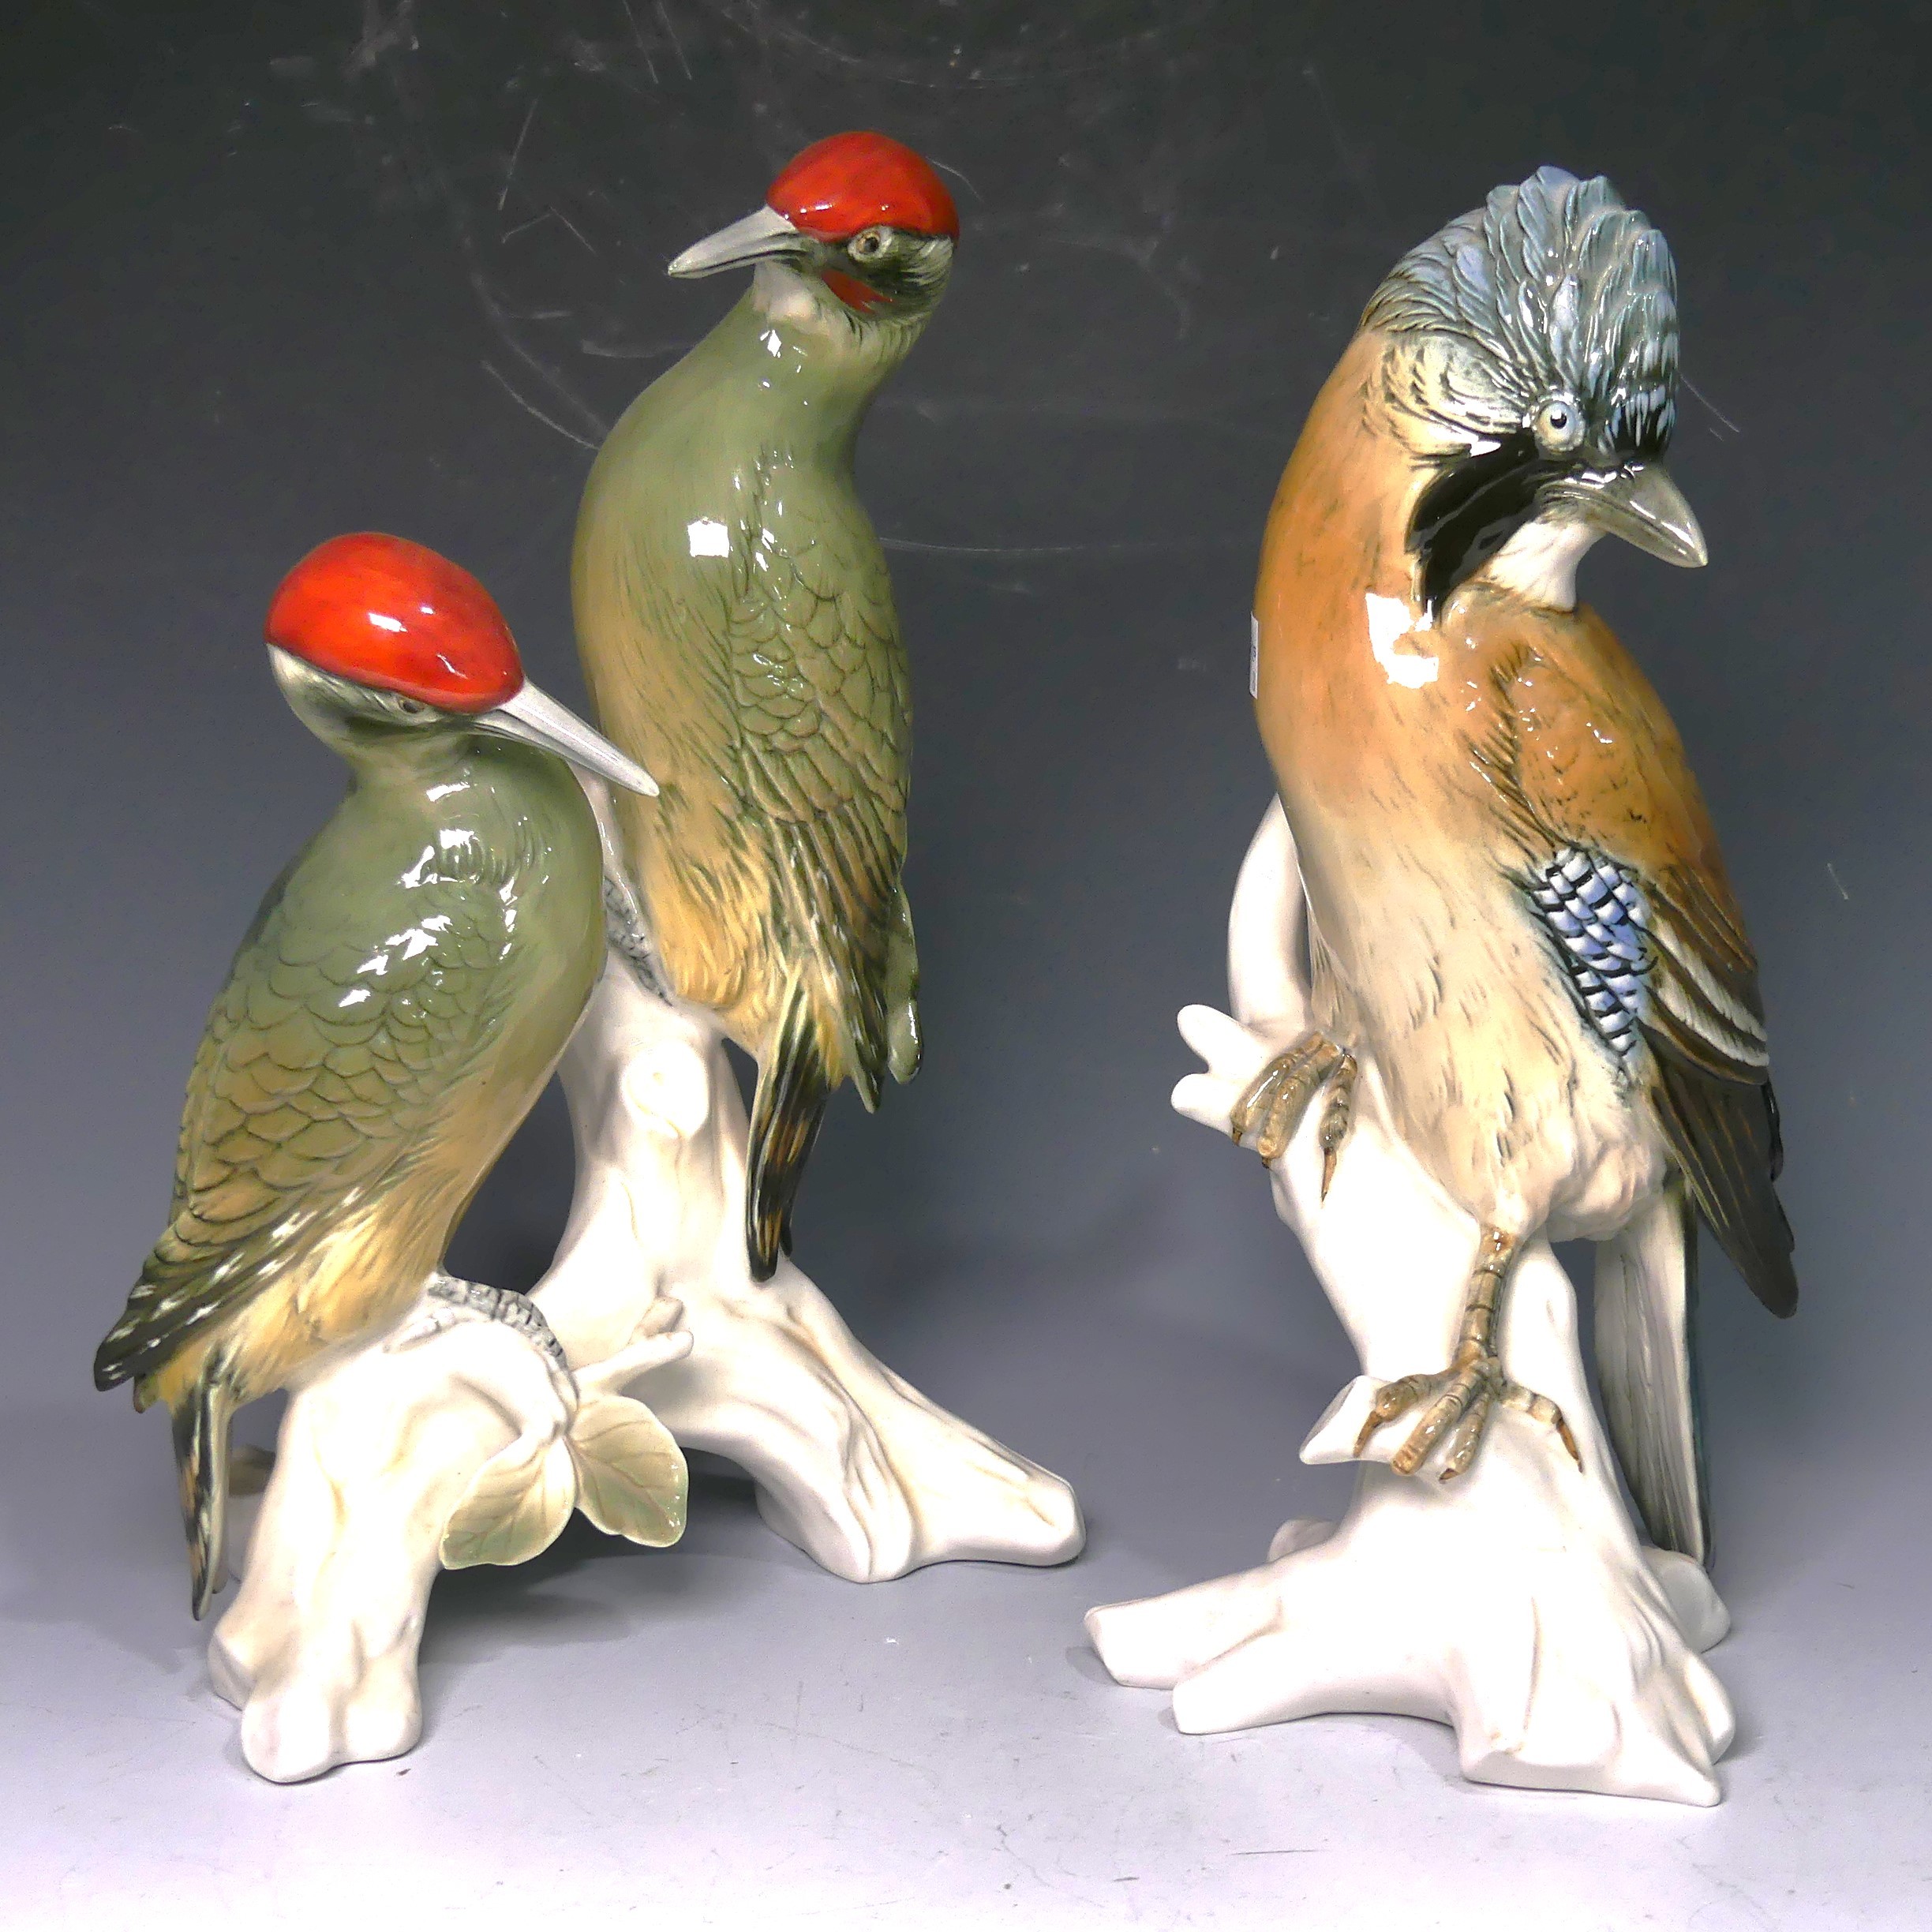 A Karl Ens for Volkstedt Rudolstadt porcelain group of two Green Woodpeckers, with factory marks